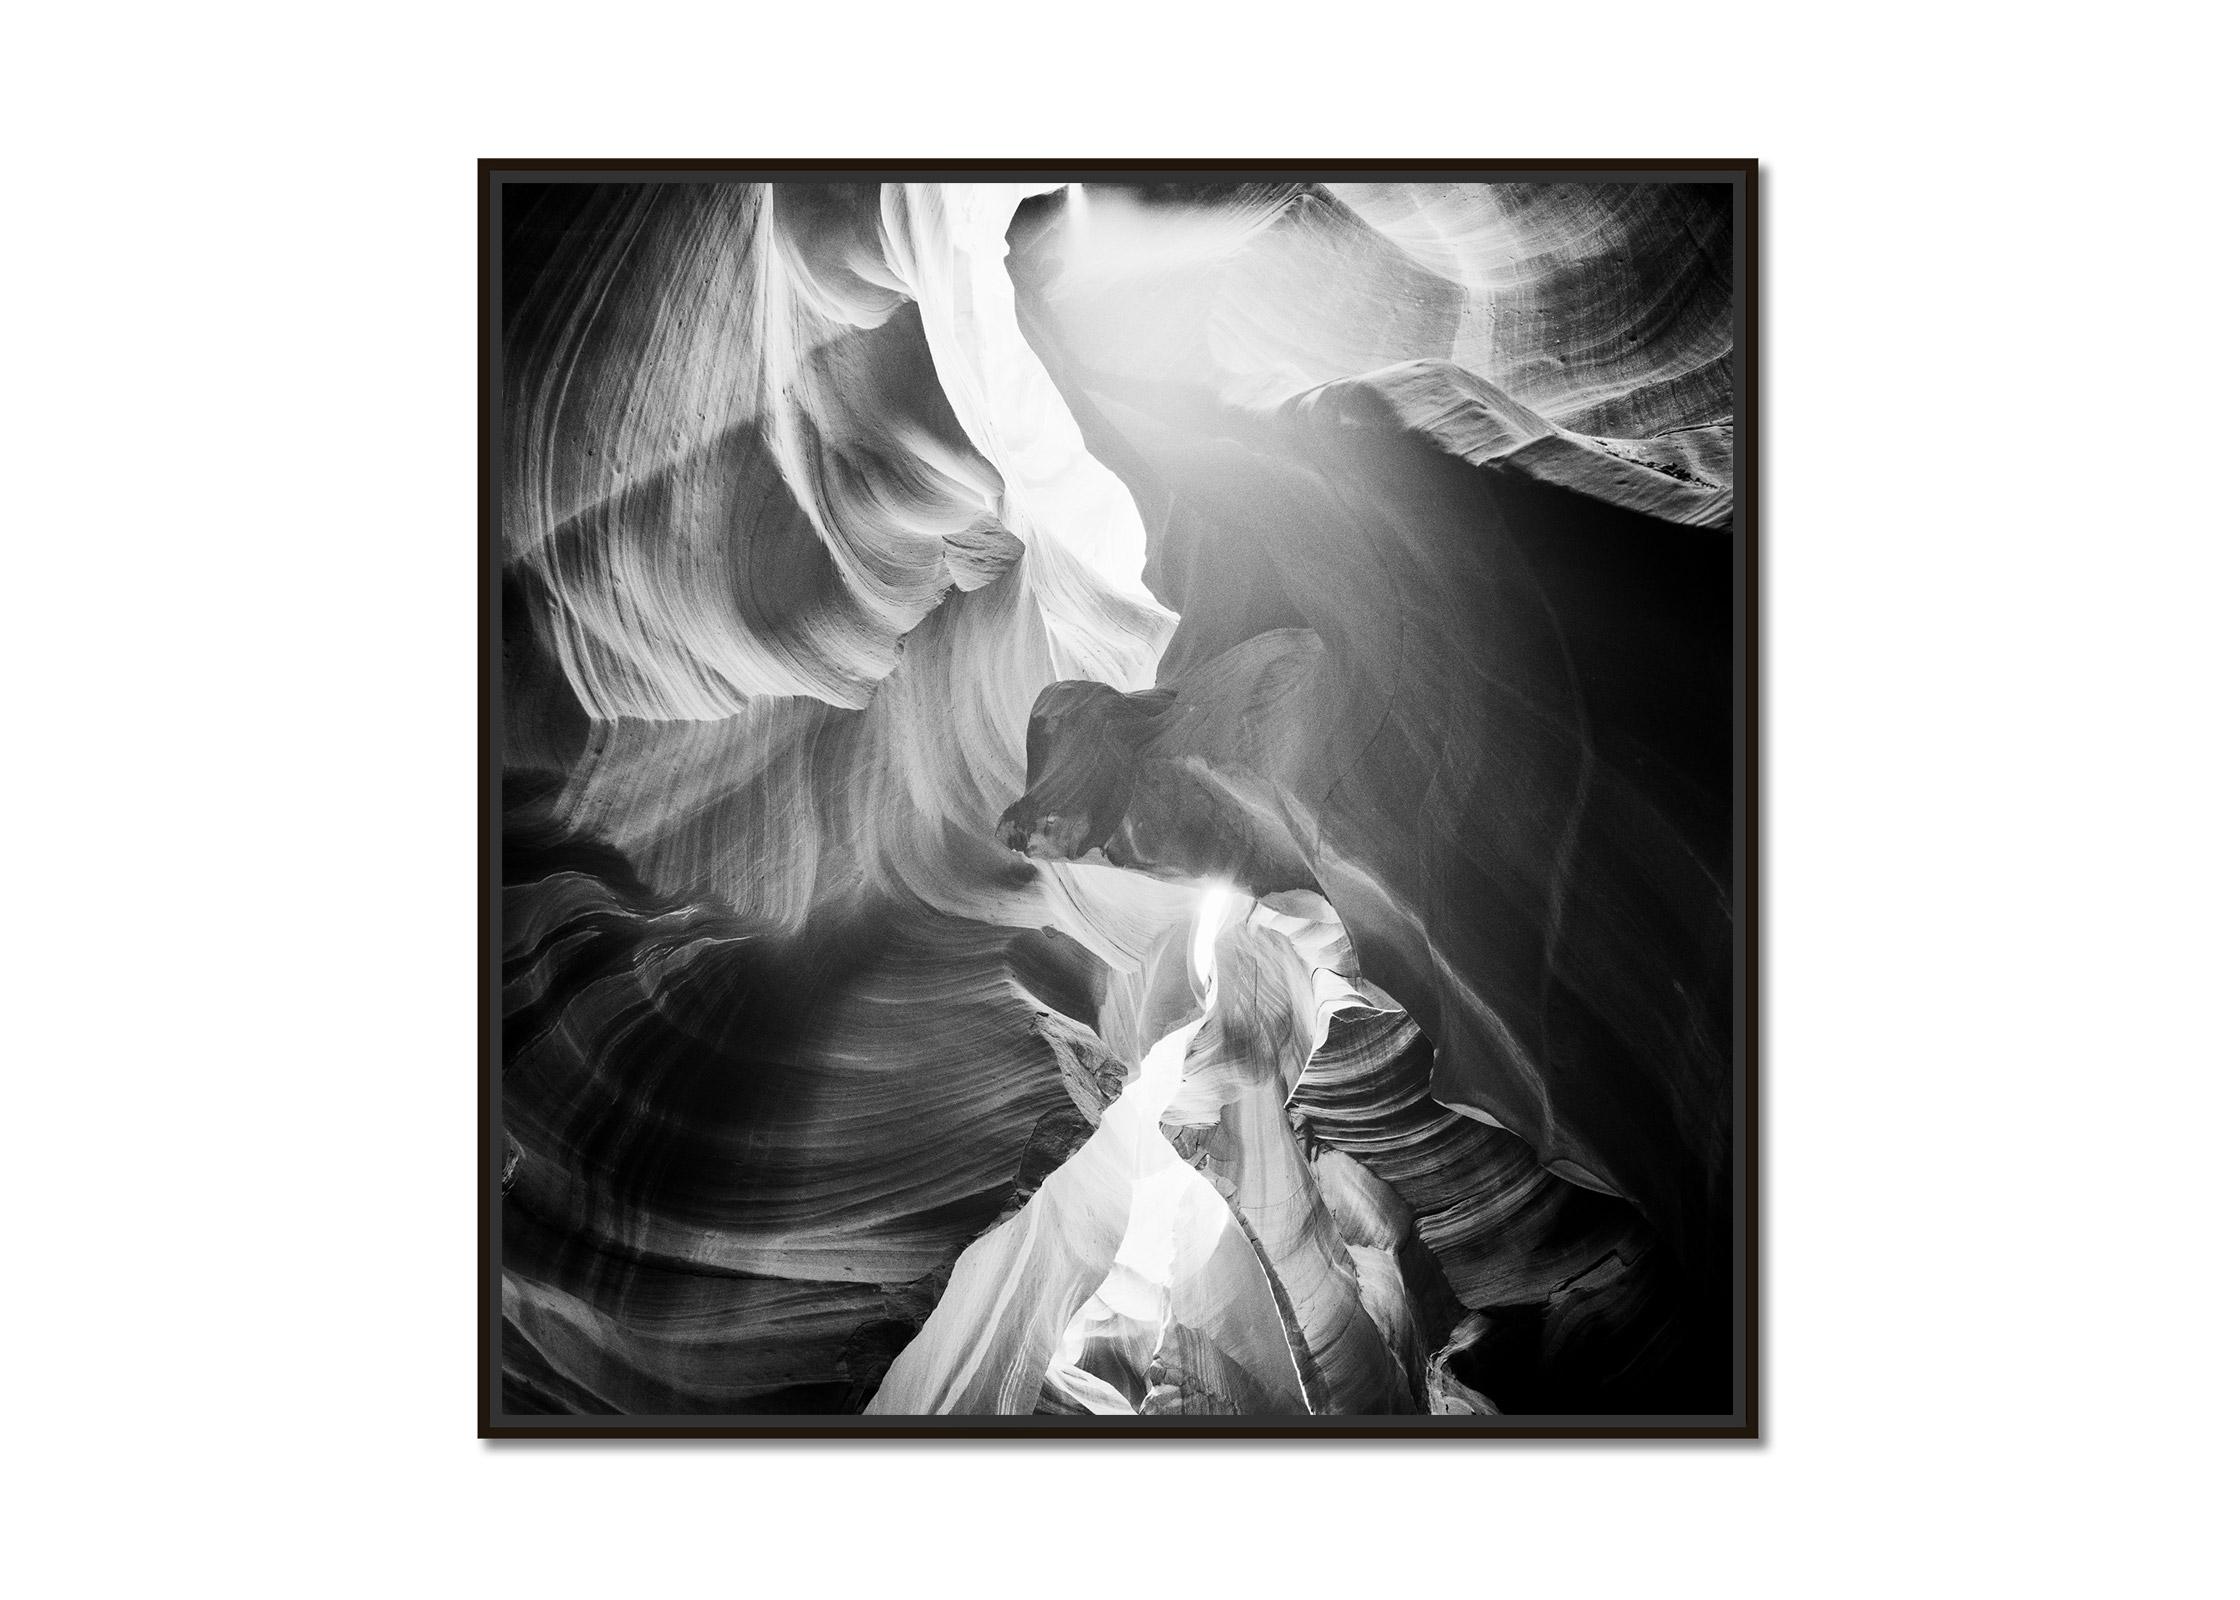 Antelope Canyon Desert Arizona, abstract black and white photography, landscape - Photograph by Gerald Berghammer